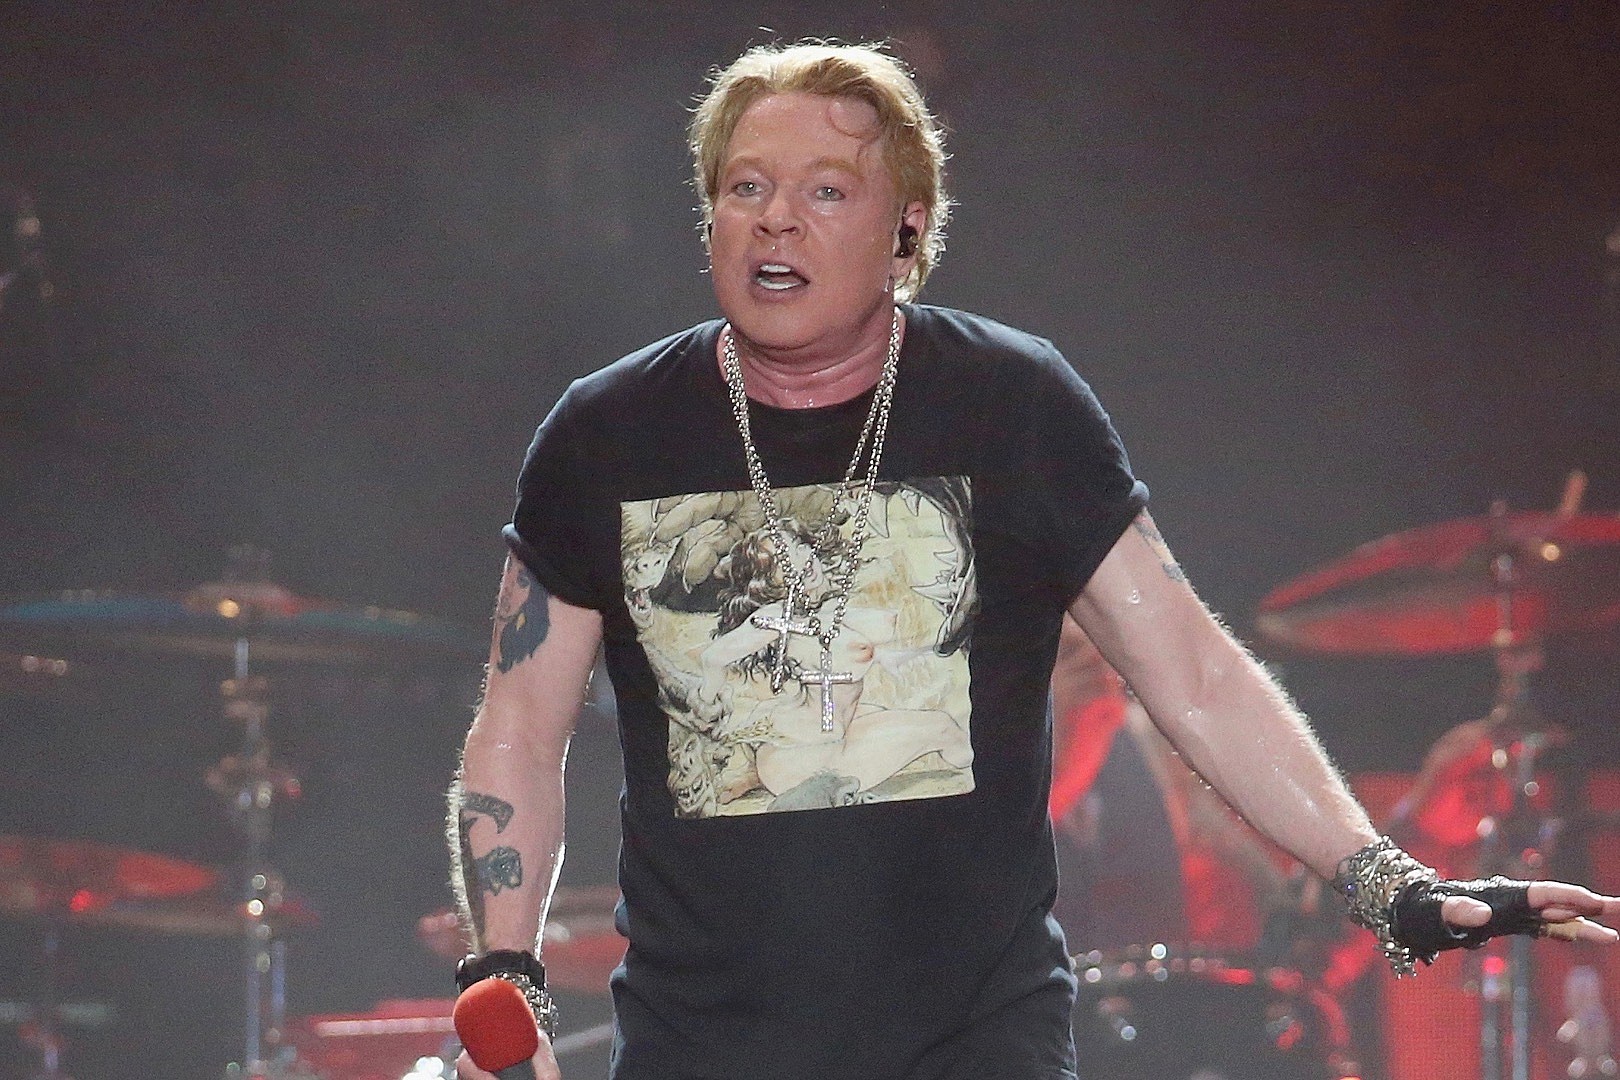 Axl Rose Guts Out GN'R's Wrigley Field Show Amidst Food Poisoning